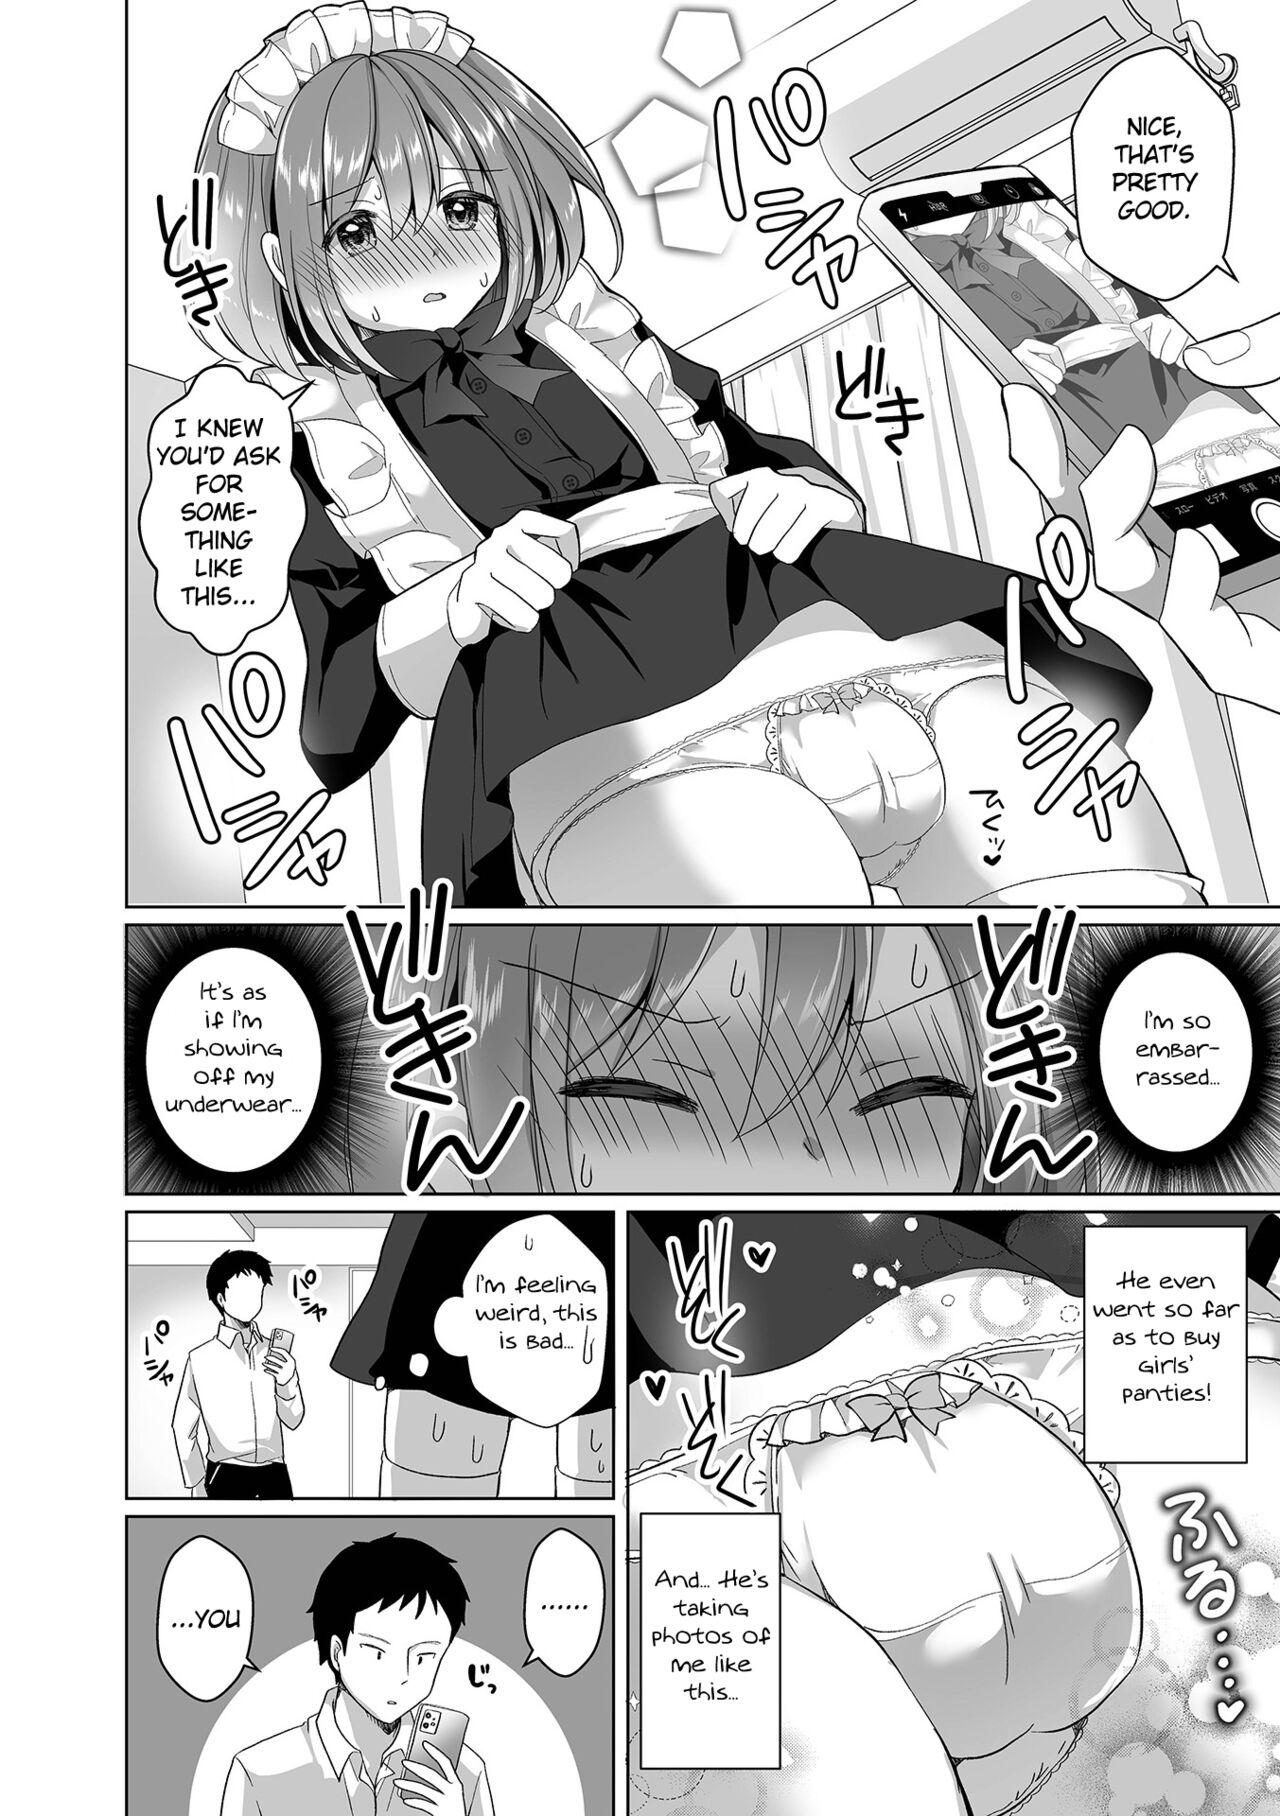 Groupfuck Sumaho Bakibaki Wabi Meido | Dressed as a Maid for Breaking His Phone Pregnant - Page 4